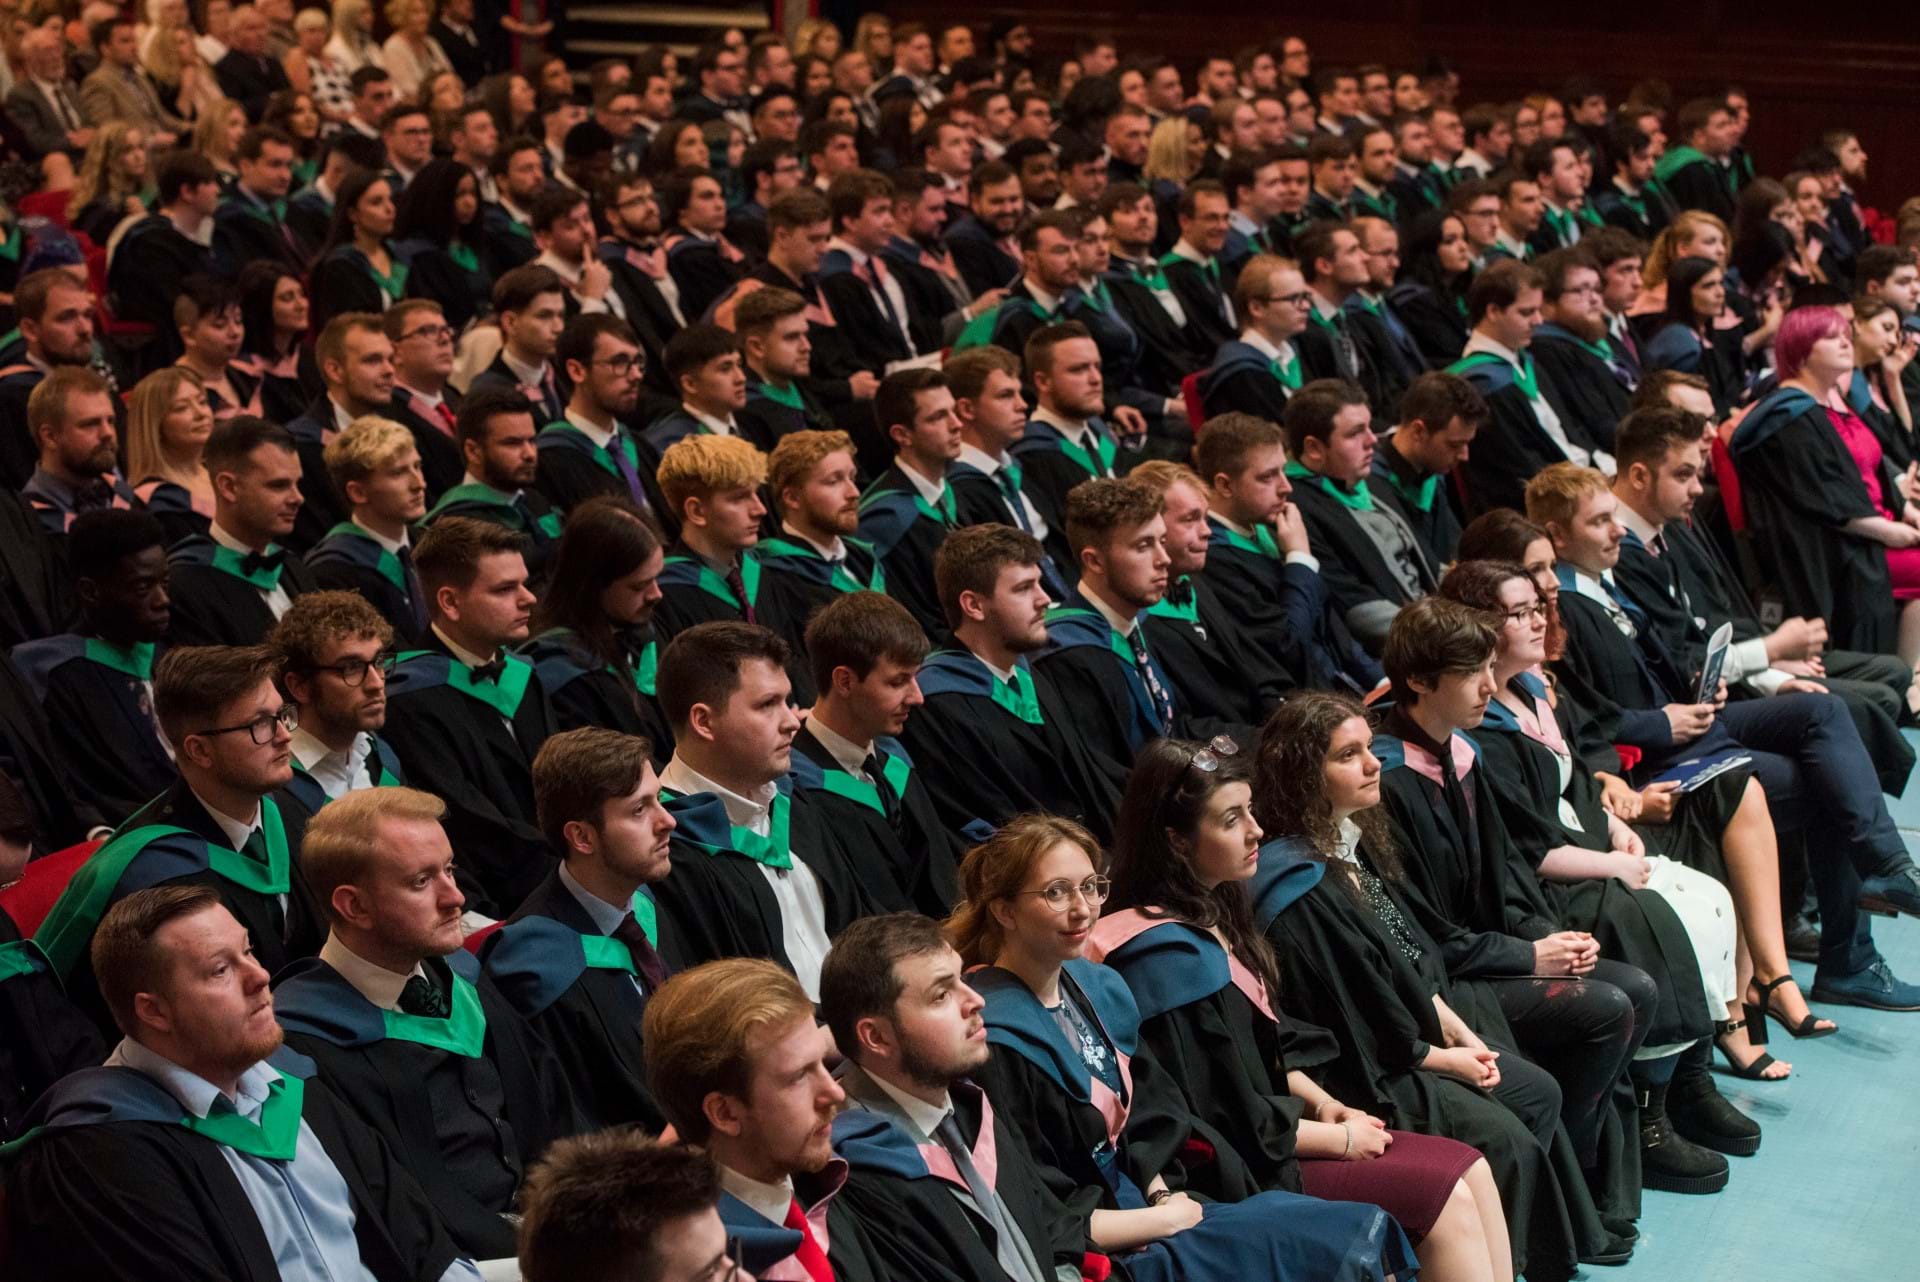 A photo of a graduation ceremony at Caird Hall